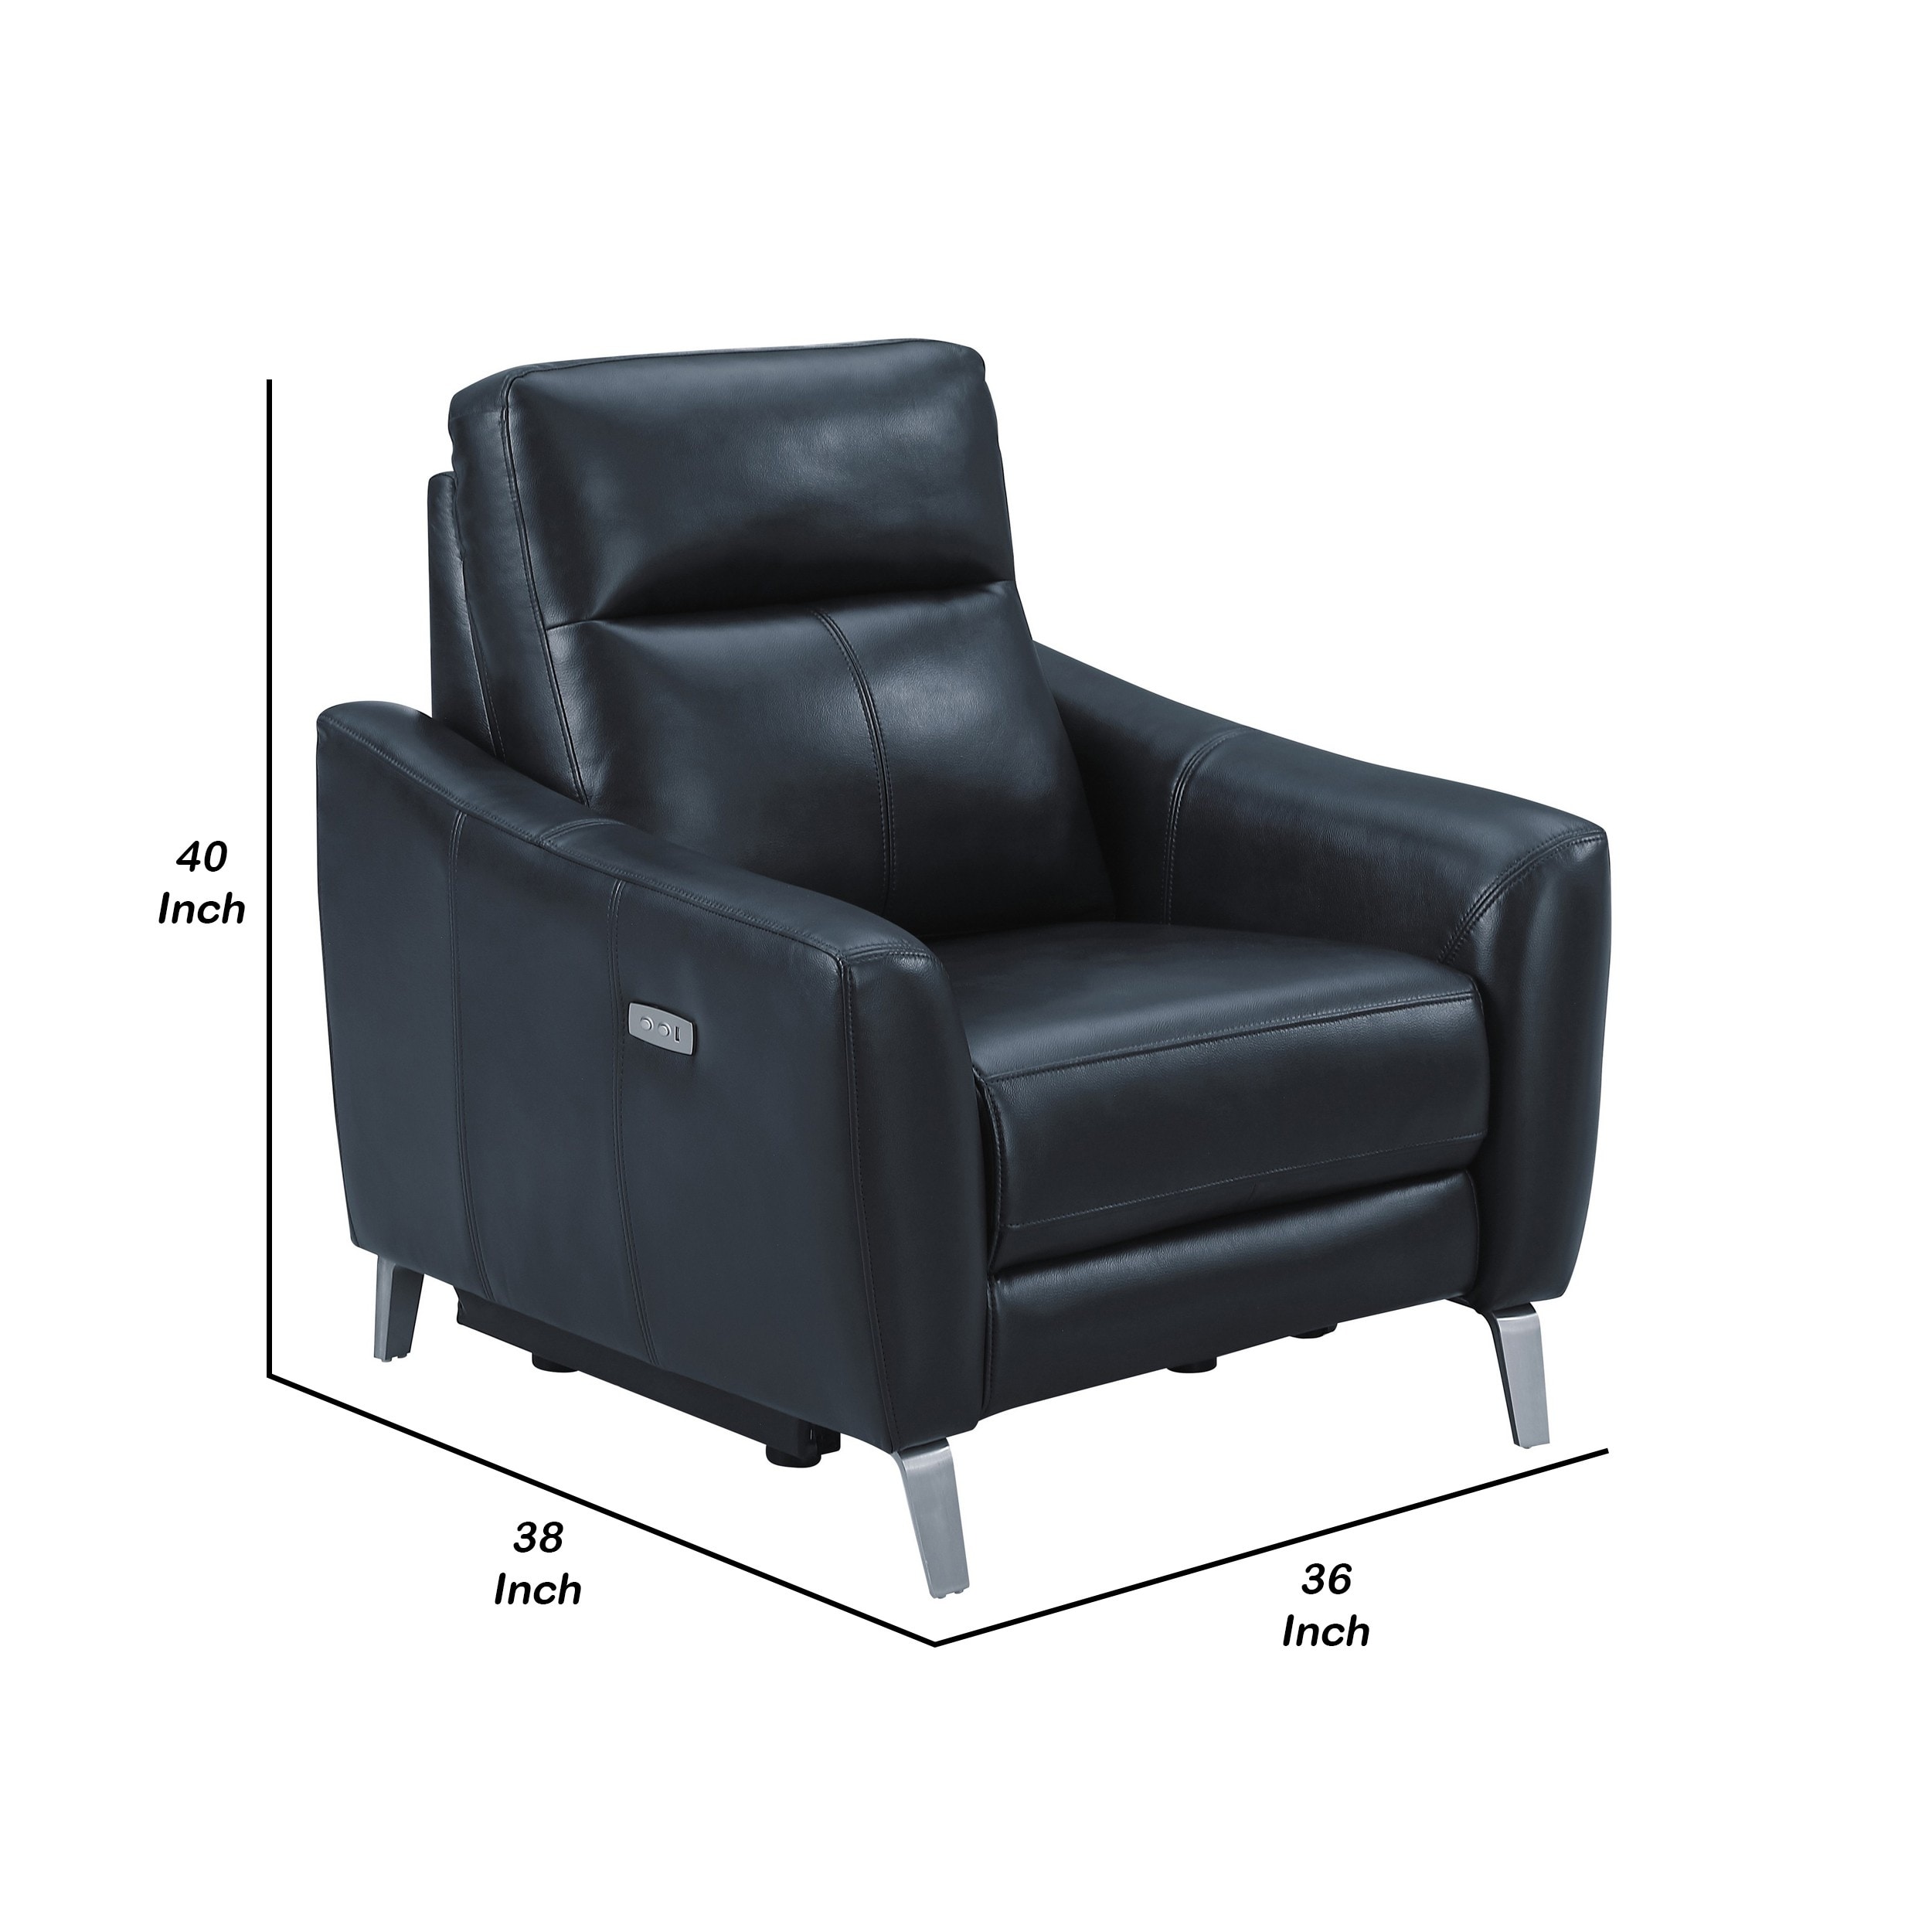 Earl 36 Inch Power Recliner, Vegan Faux Leather, USB Ports, Navy Blue